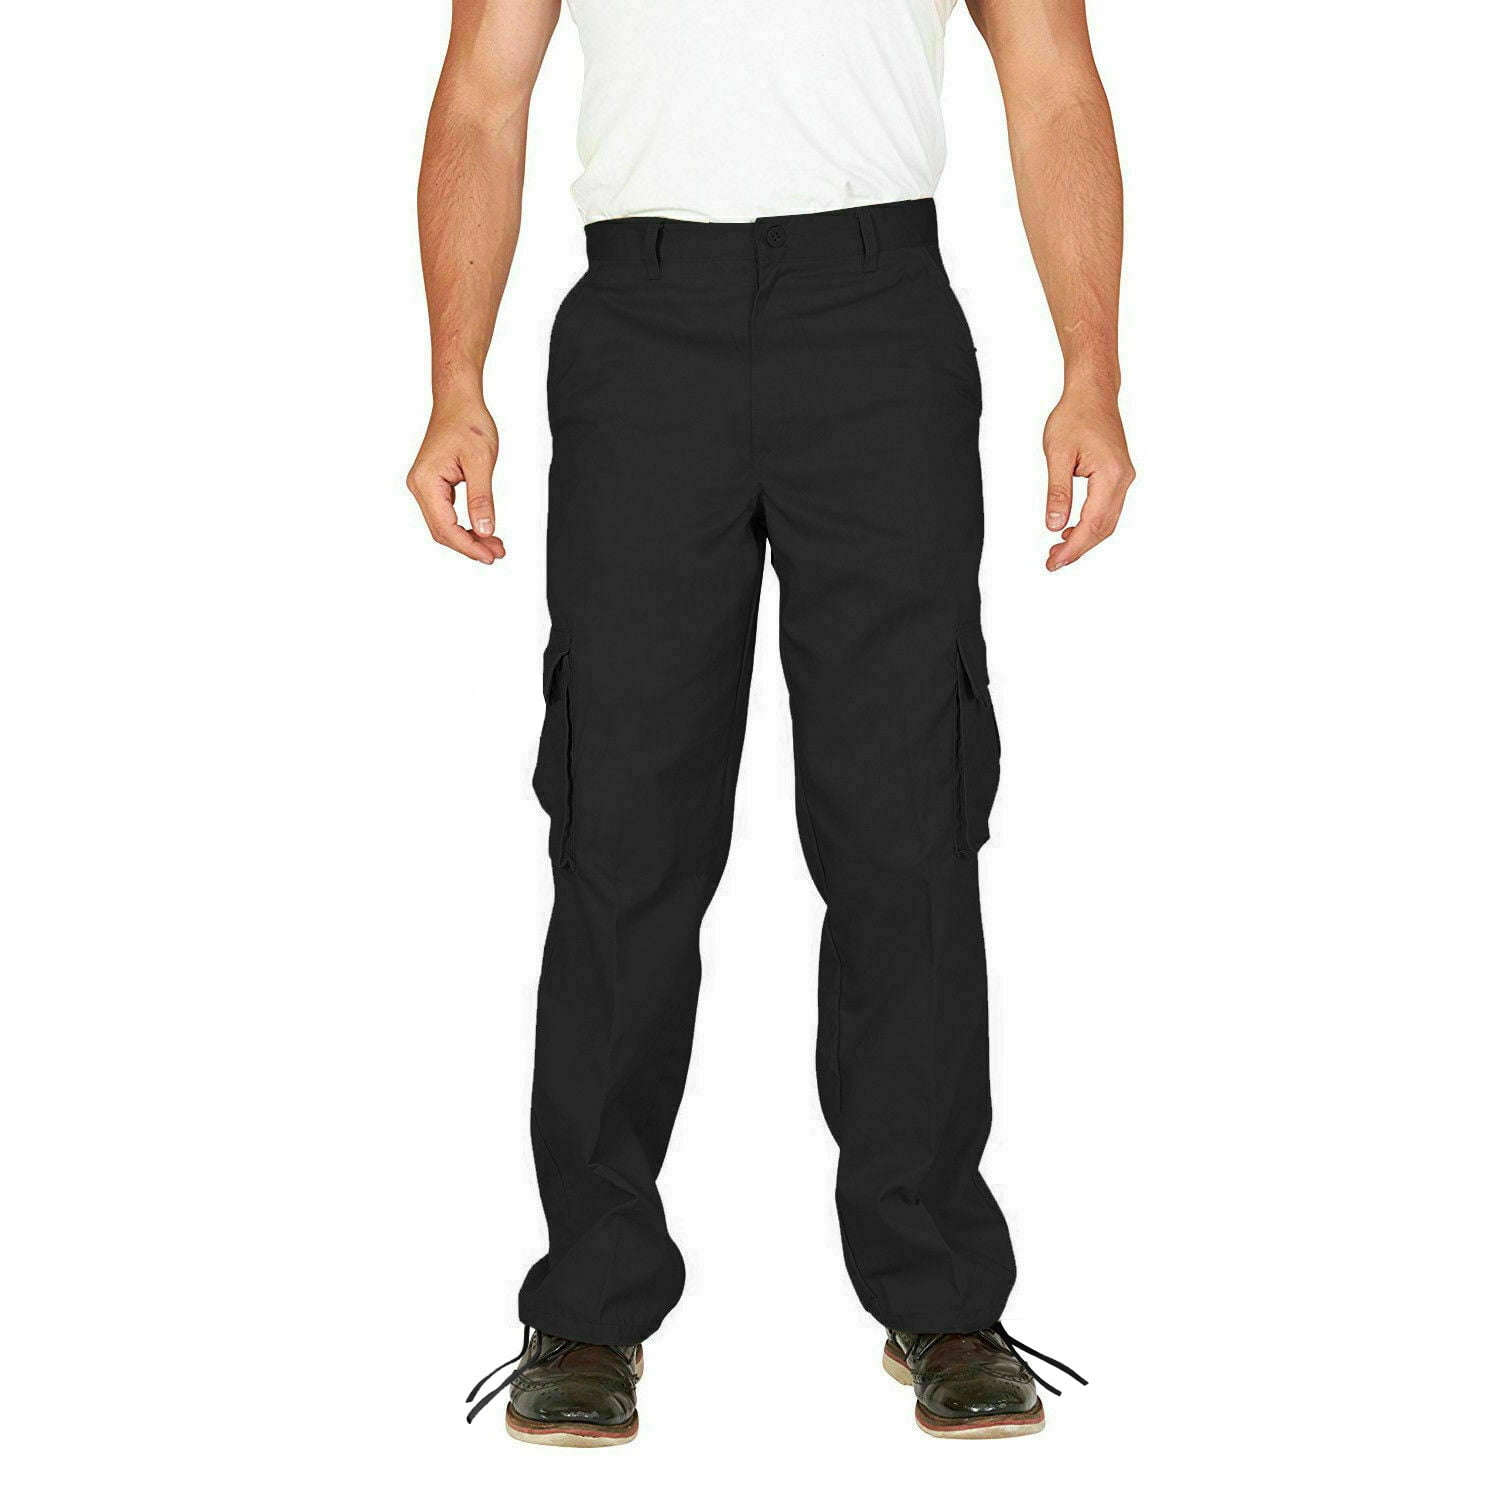 Men's Tactical Combat Military Army Work Slim Fit Twill Cargo Pants  Trousers (VERTICAL - Navy,34,34) 